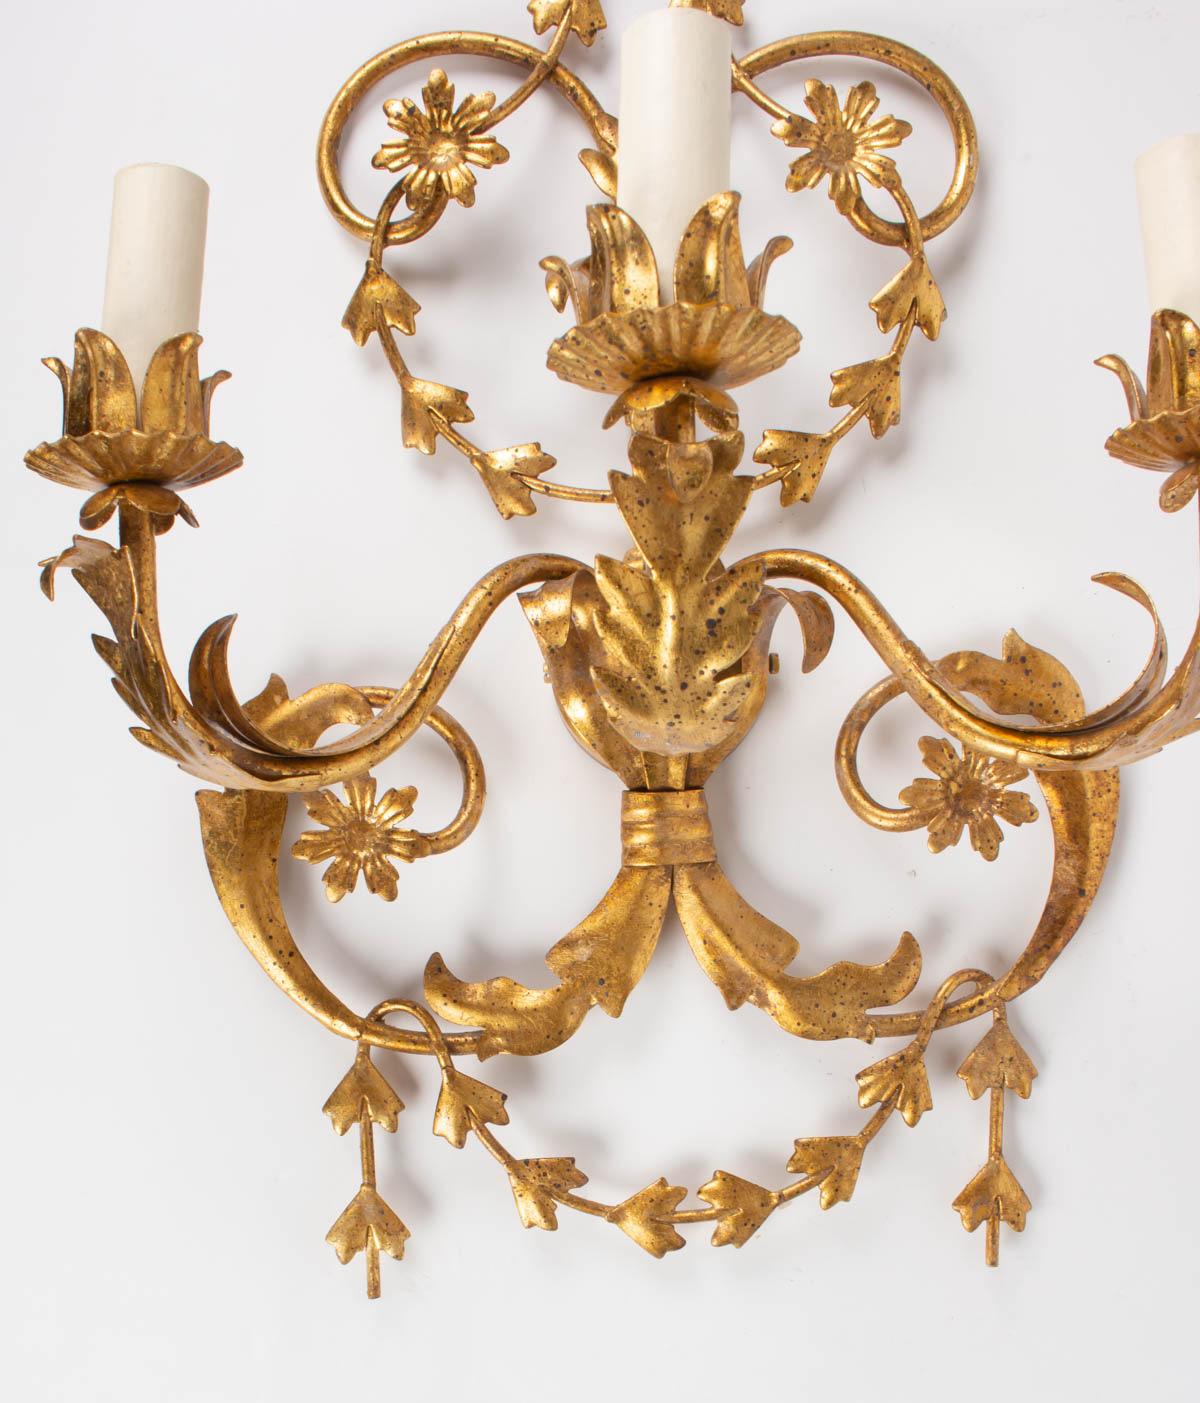 These 3 elegant sconces inspired by the Louis XVI style 
Composed of several garlands of flowers and foliage forming very harmonious and light volutes and counter-volutes.
They are equipped with three arms of light positioned at mid-height of the